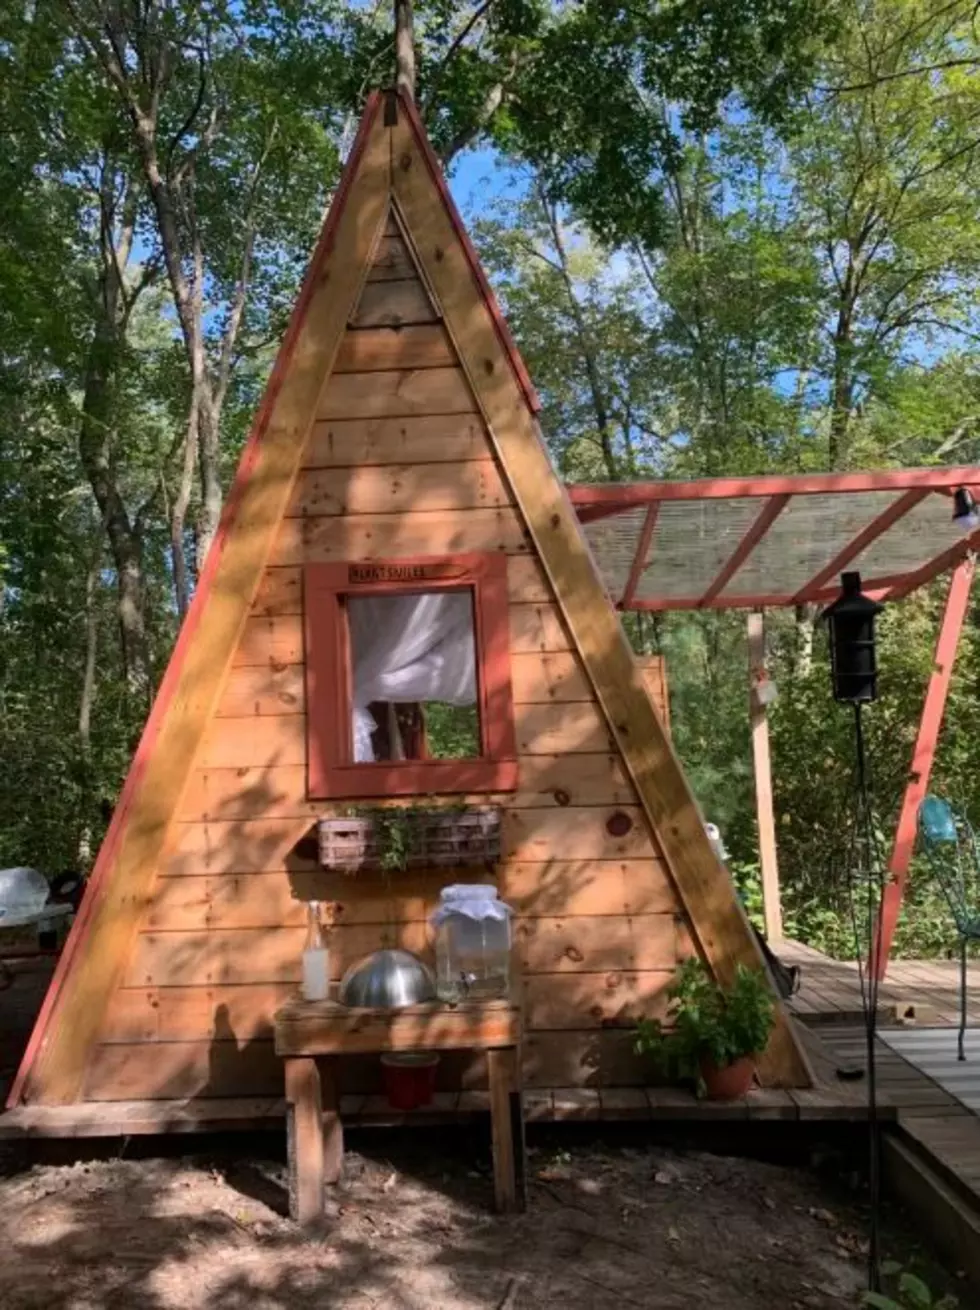 Unique Rental: Rustic A-Frame Cabin With Private Dock and River in Massachusetts